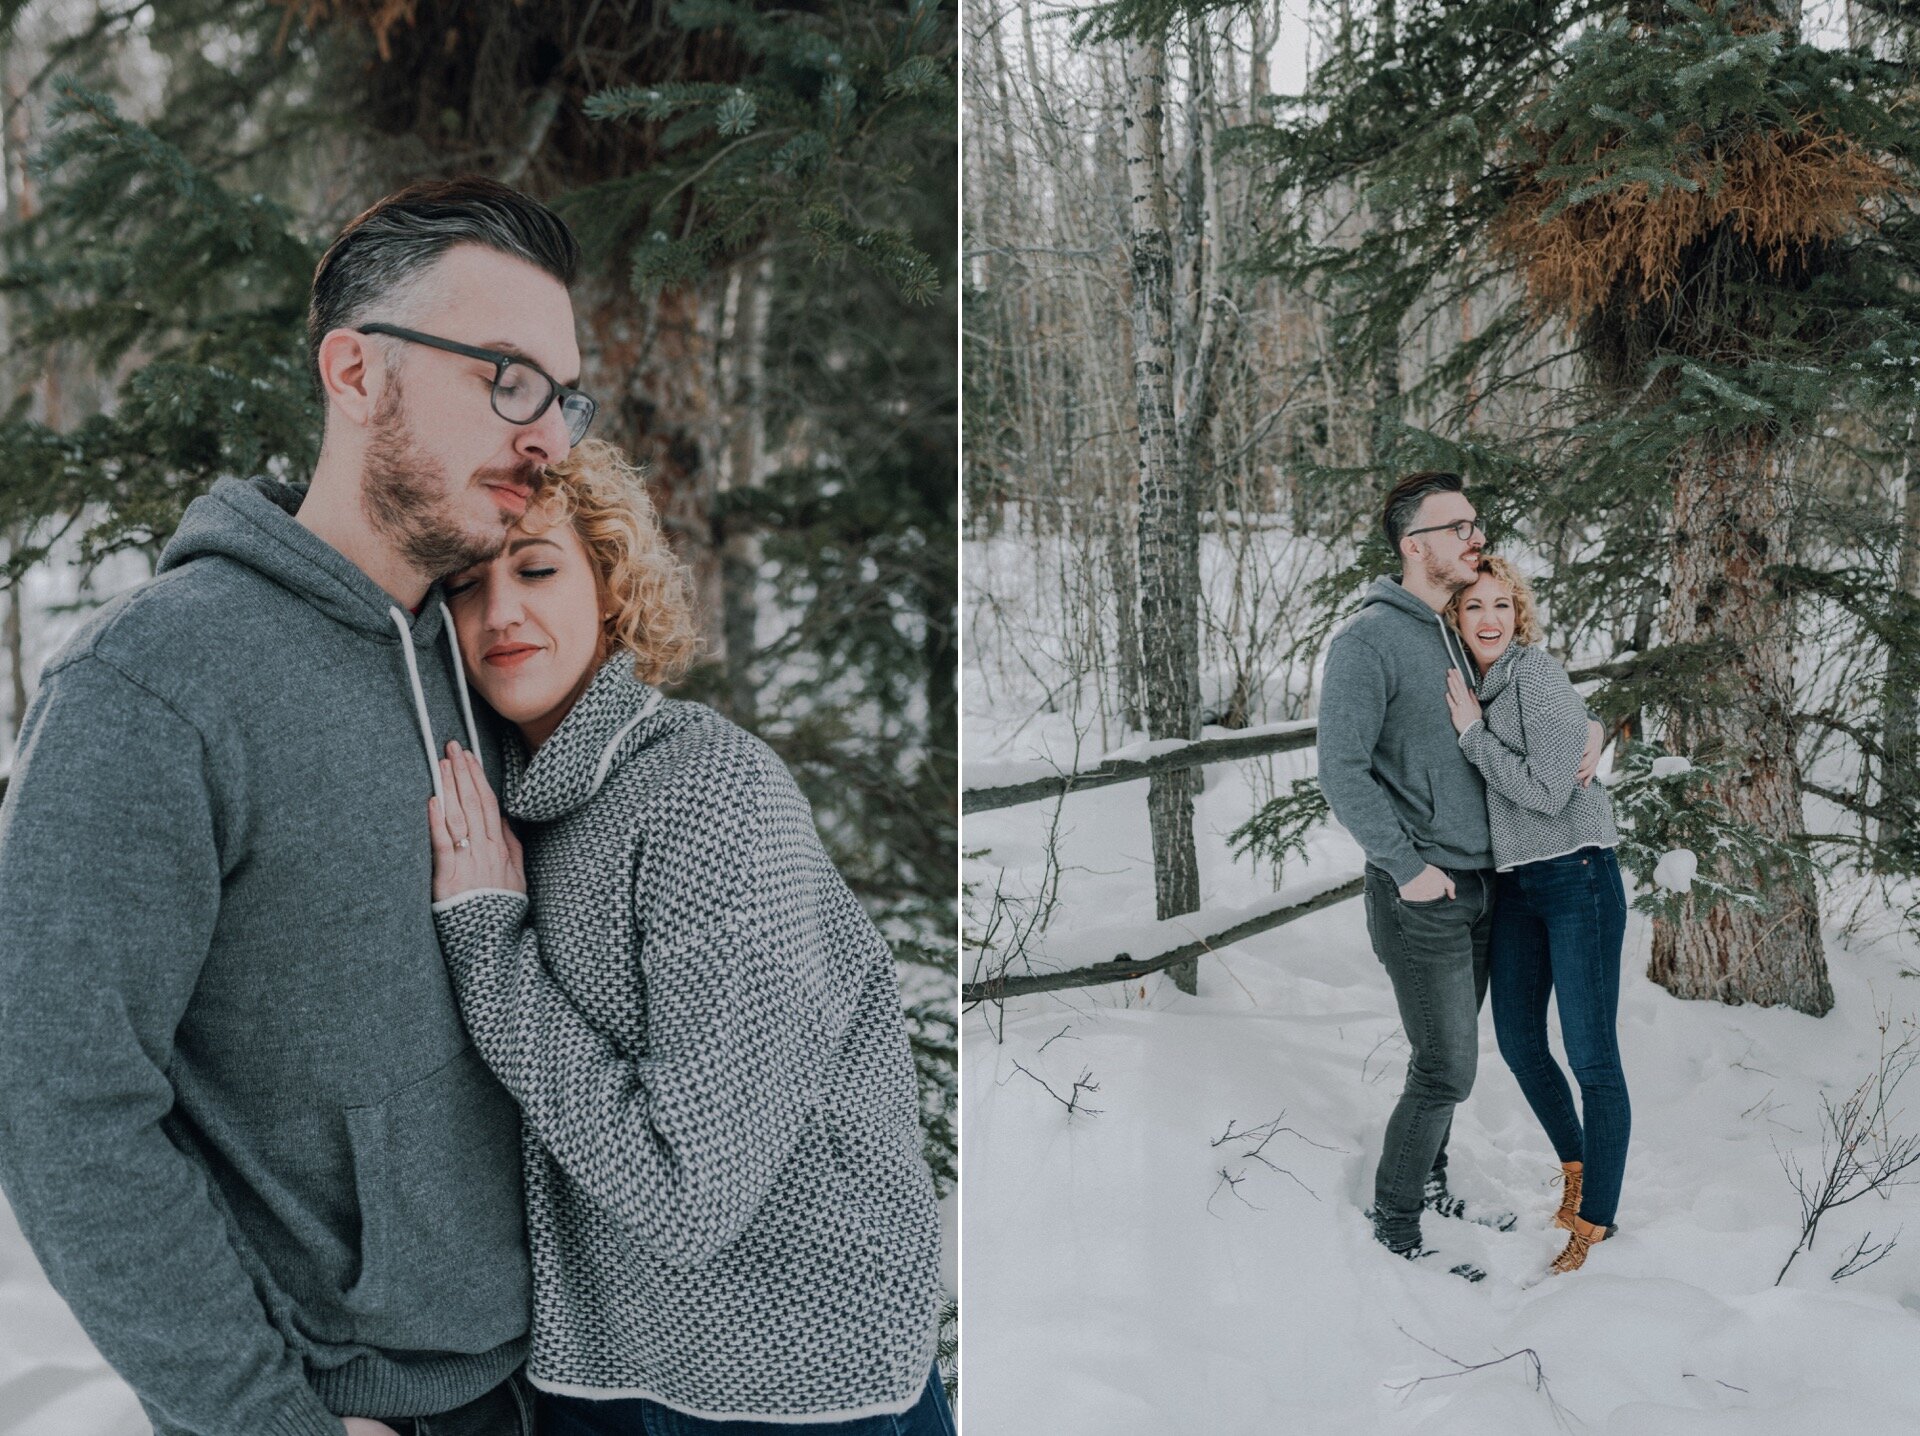 09_Kelsey&Taylor041_Kelsey&Taylor040_frisco_Photographer_engagement_Co_Hannah_Session_Photography_Minnesota_Snowy_Colorado_adventure_ampe_Mountain_engaged.jpg